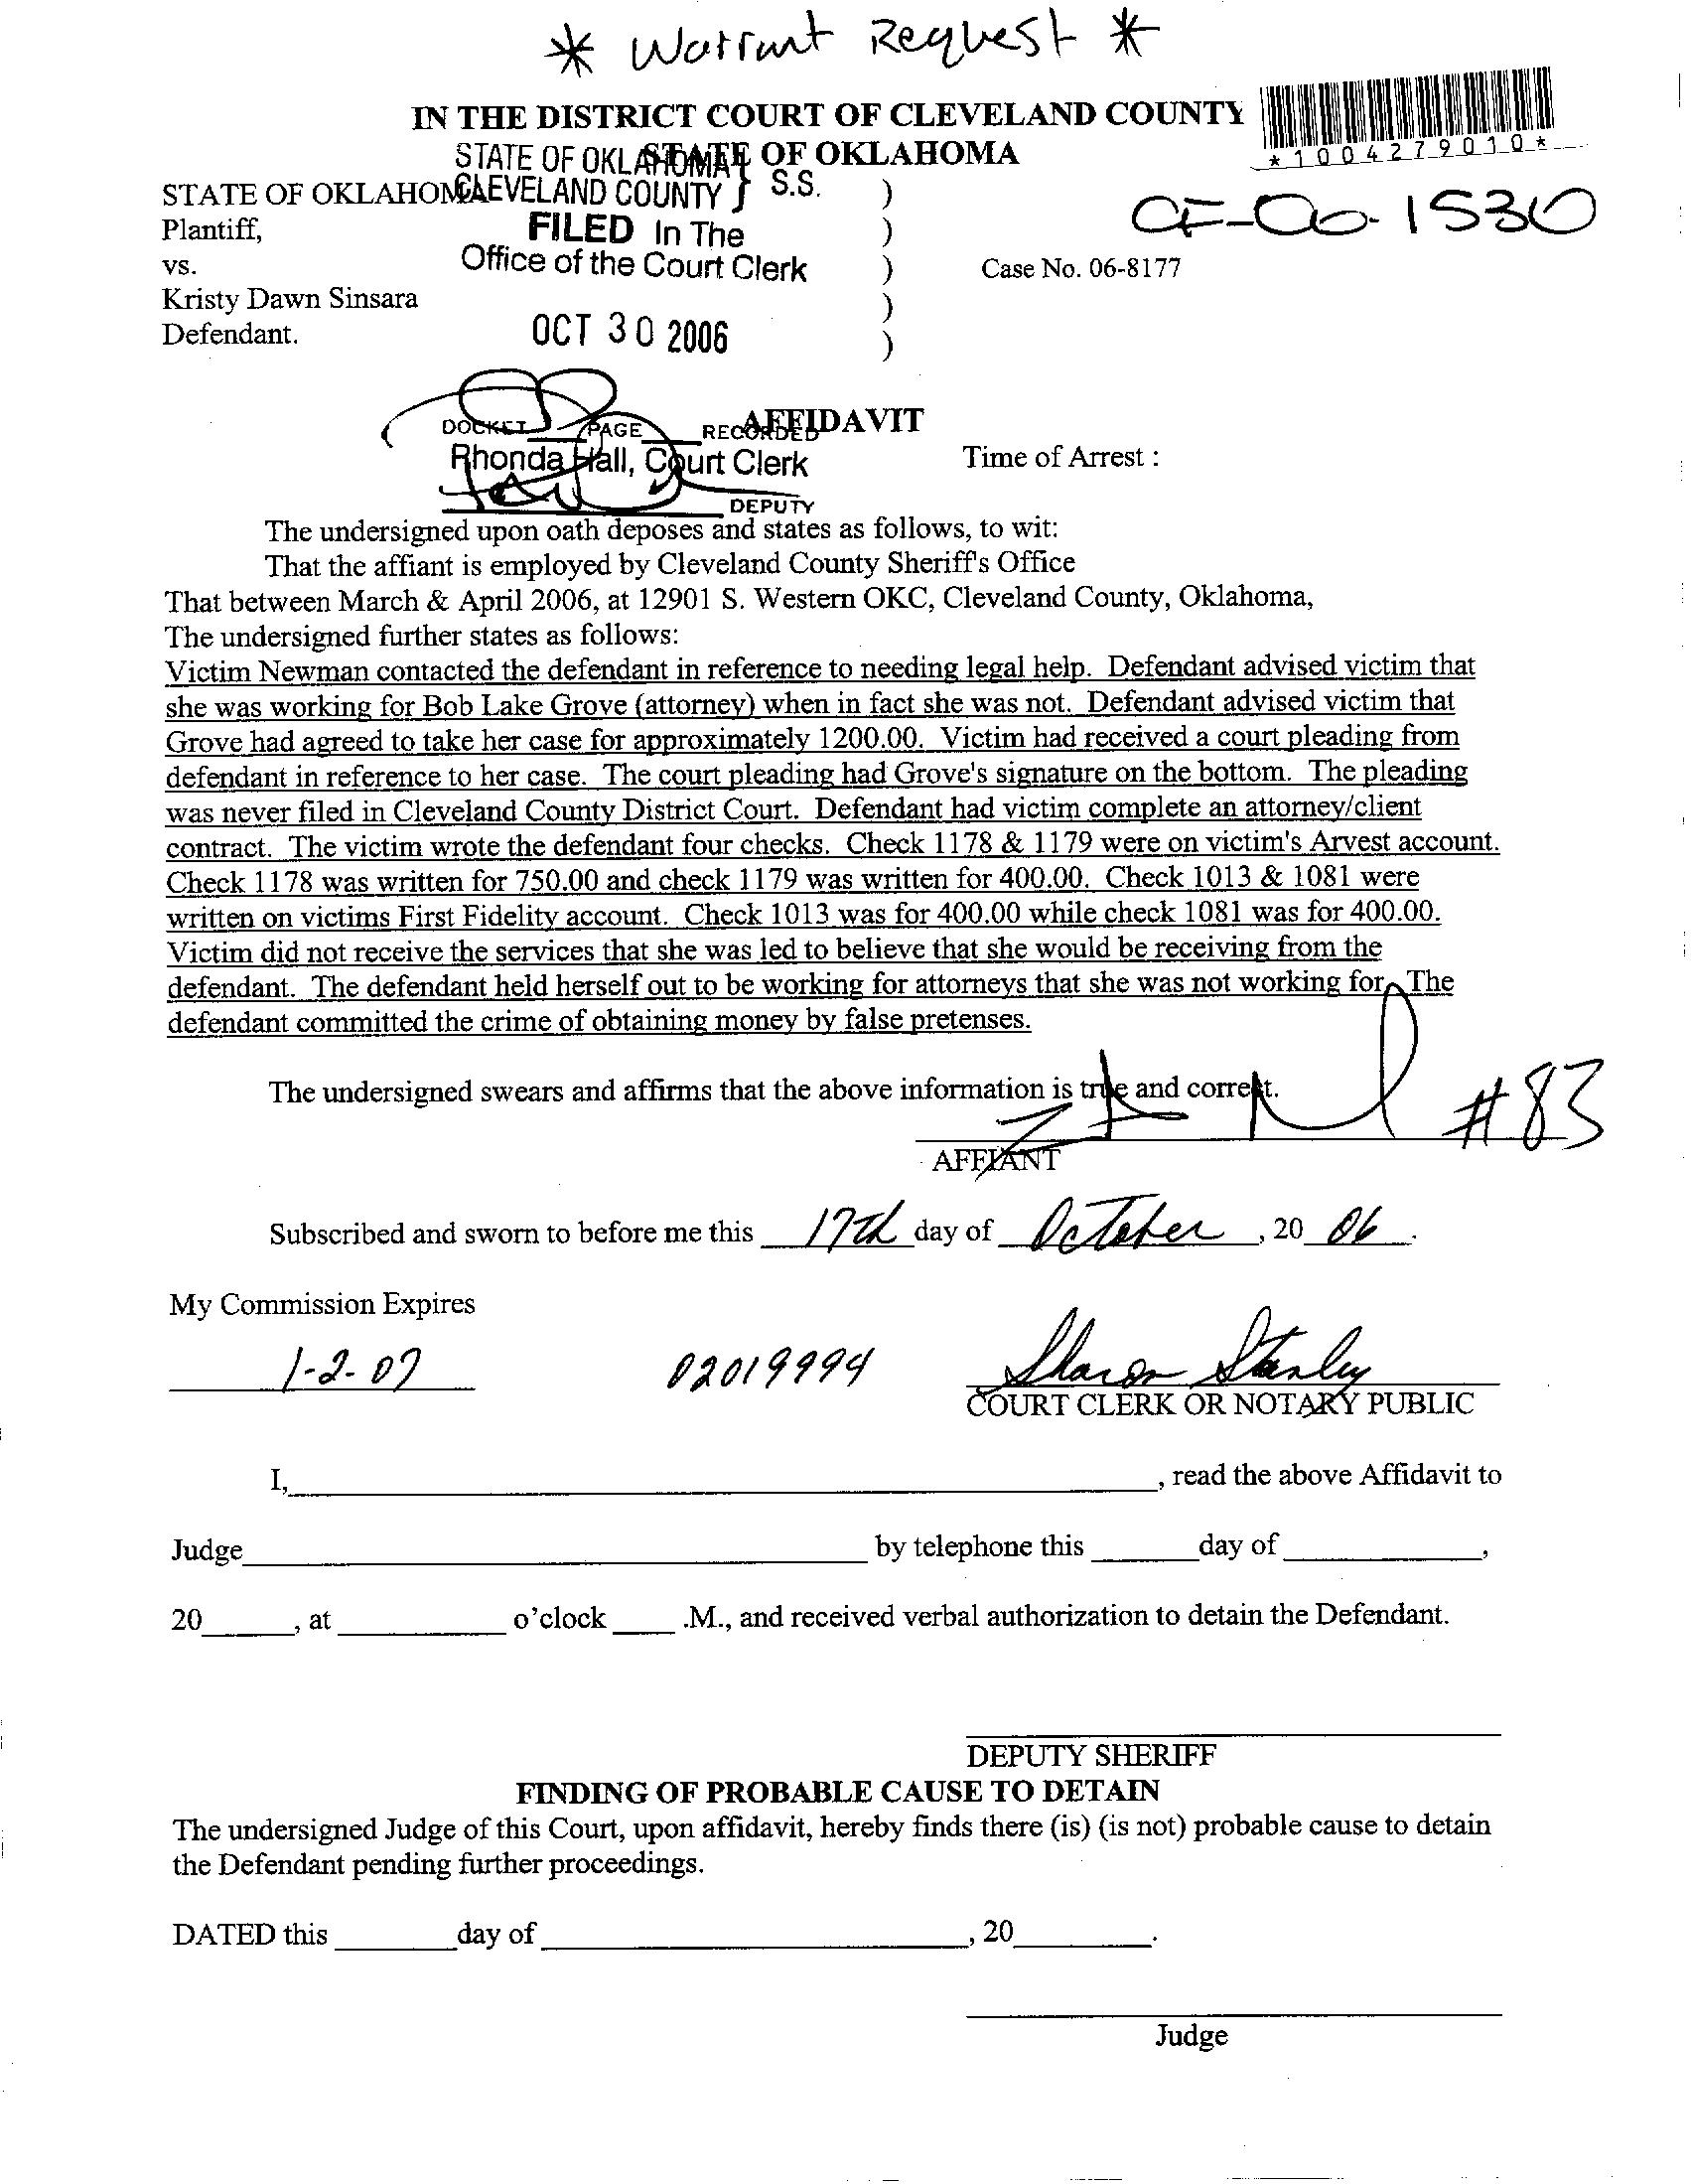 This is a copy of the victims affidavit stating that Kristy claimed to be working for an attny that she wasn't, forged the attny's name on documents, never filed them with the court but did take the $